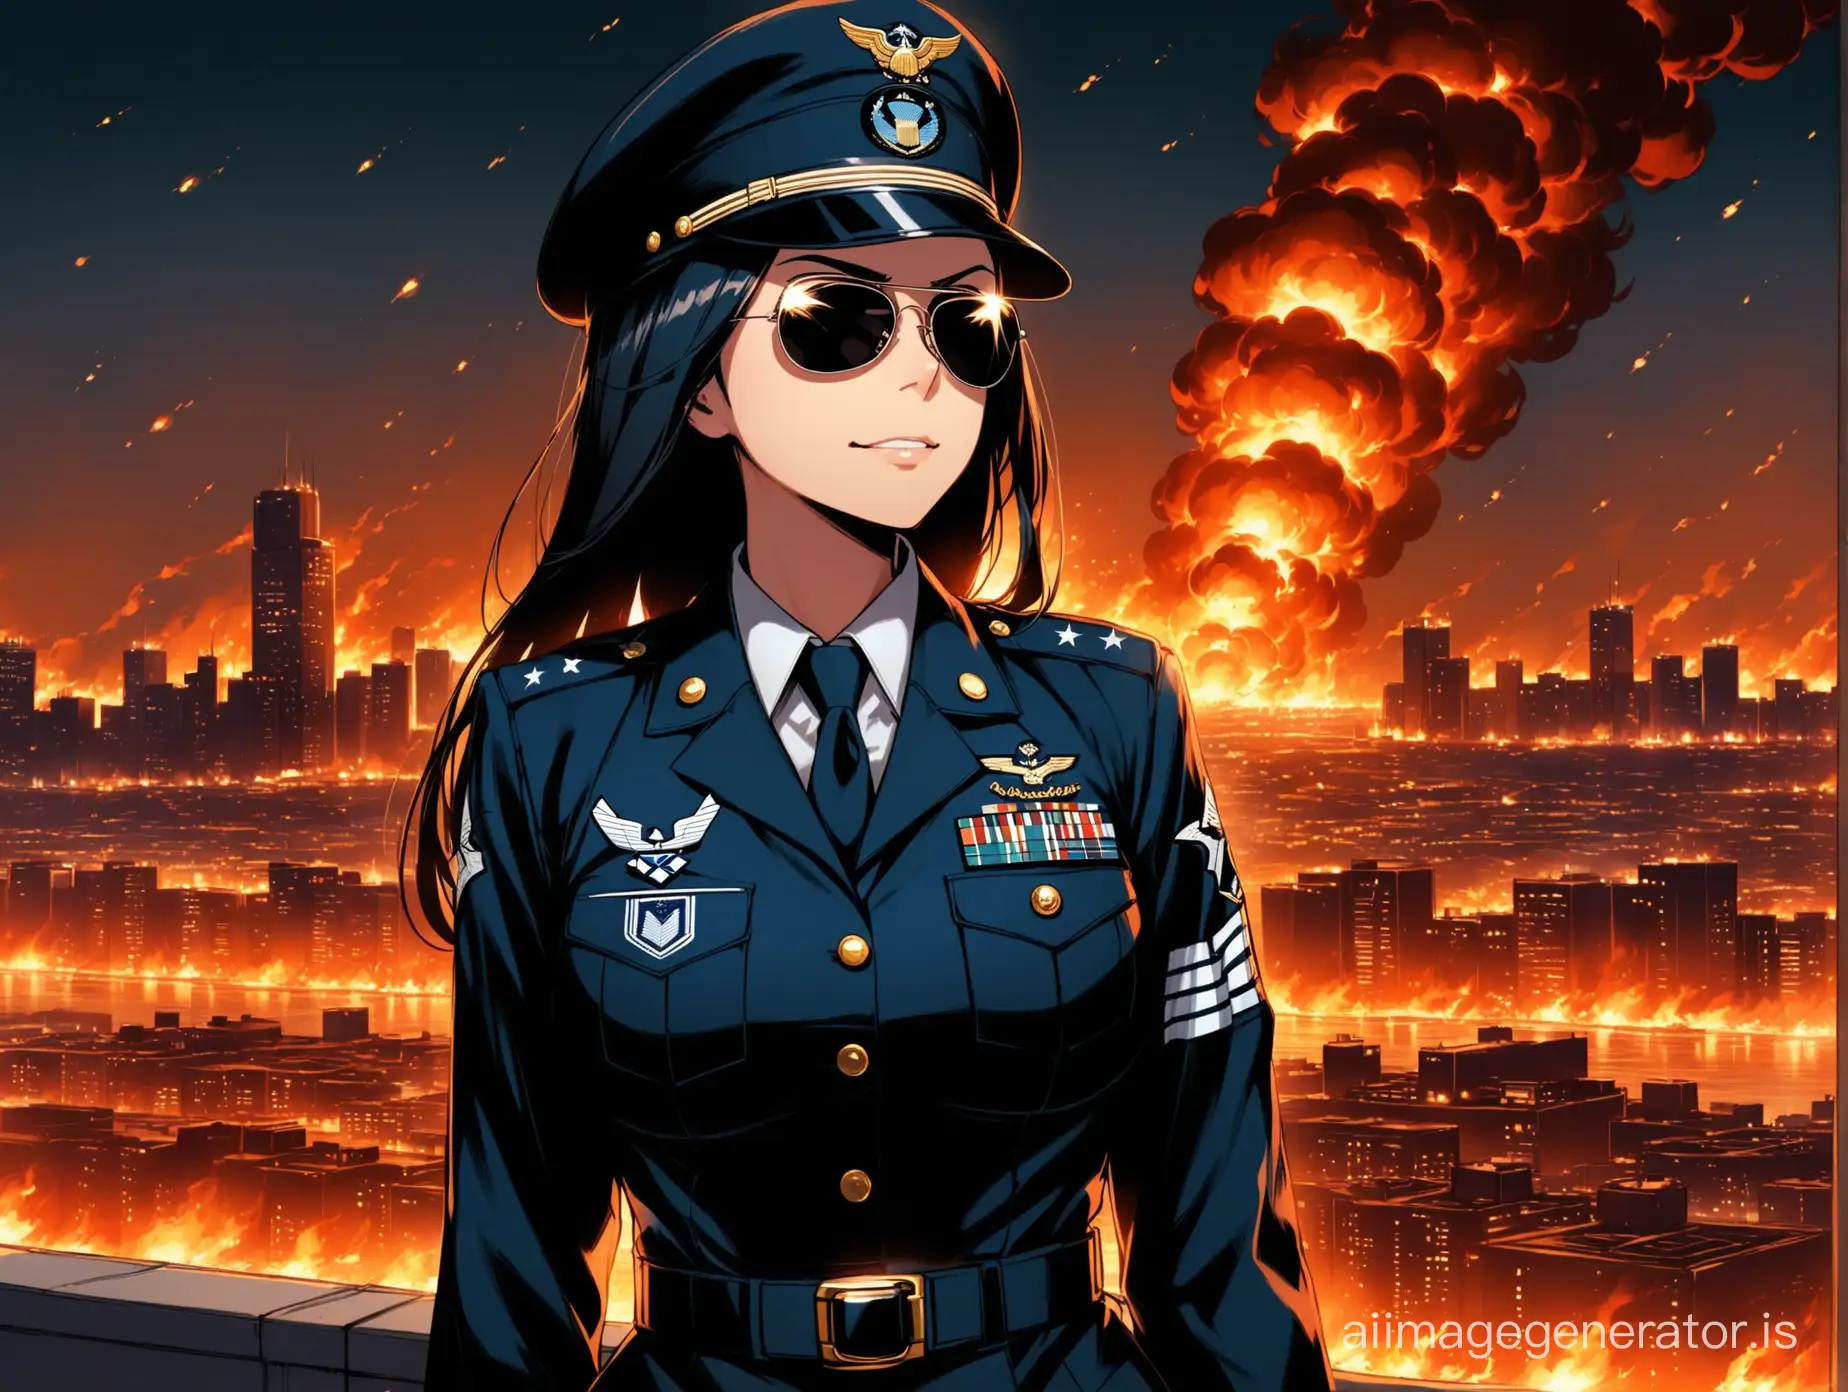 Serious-BlackHaired-Air-Force-Officer-in-Burning-City